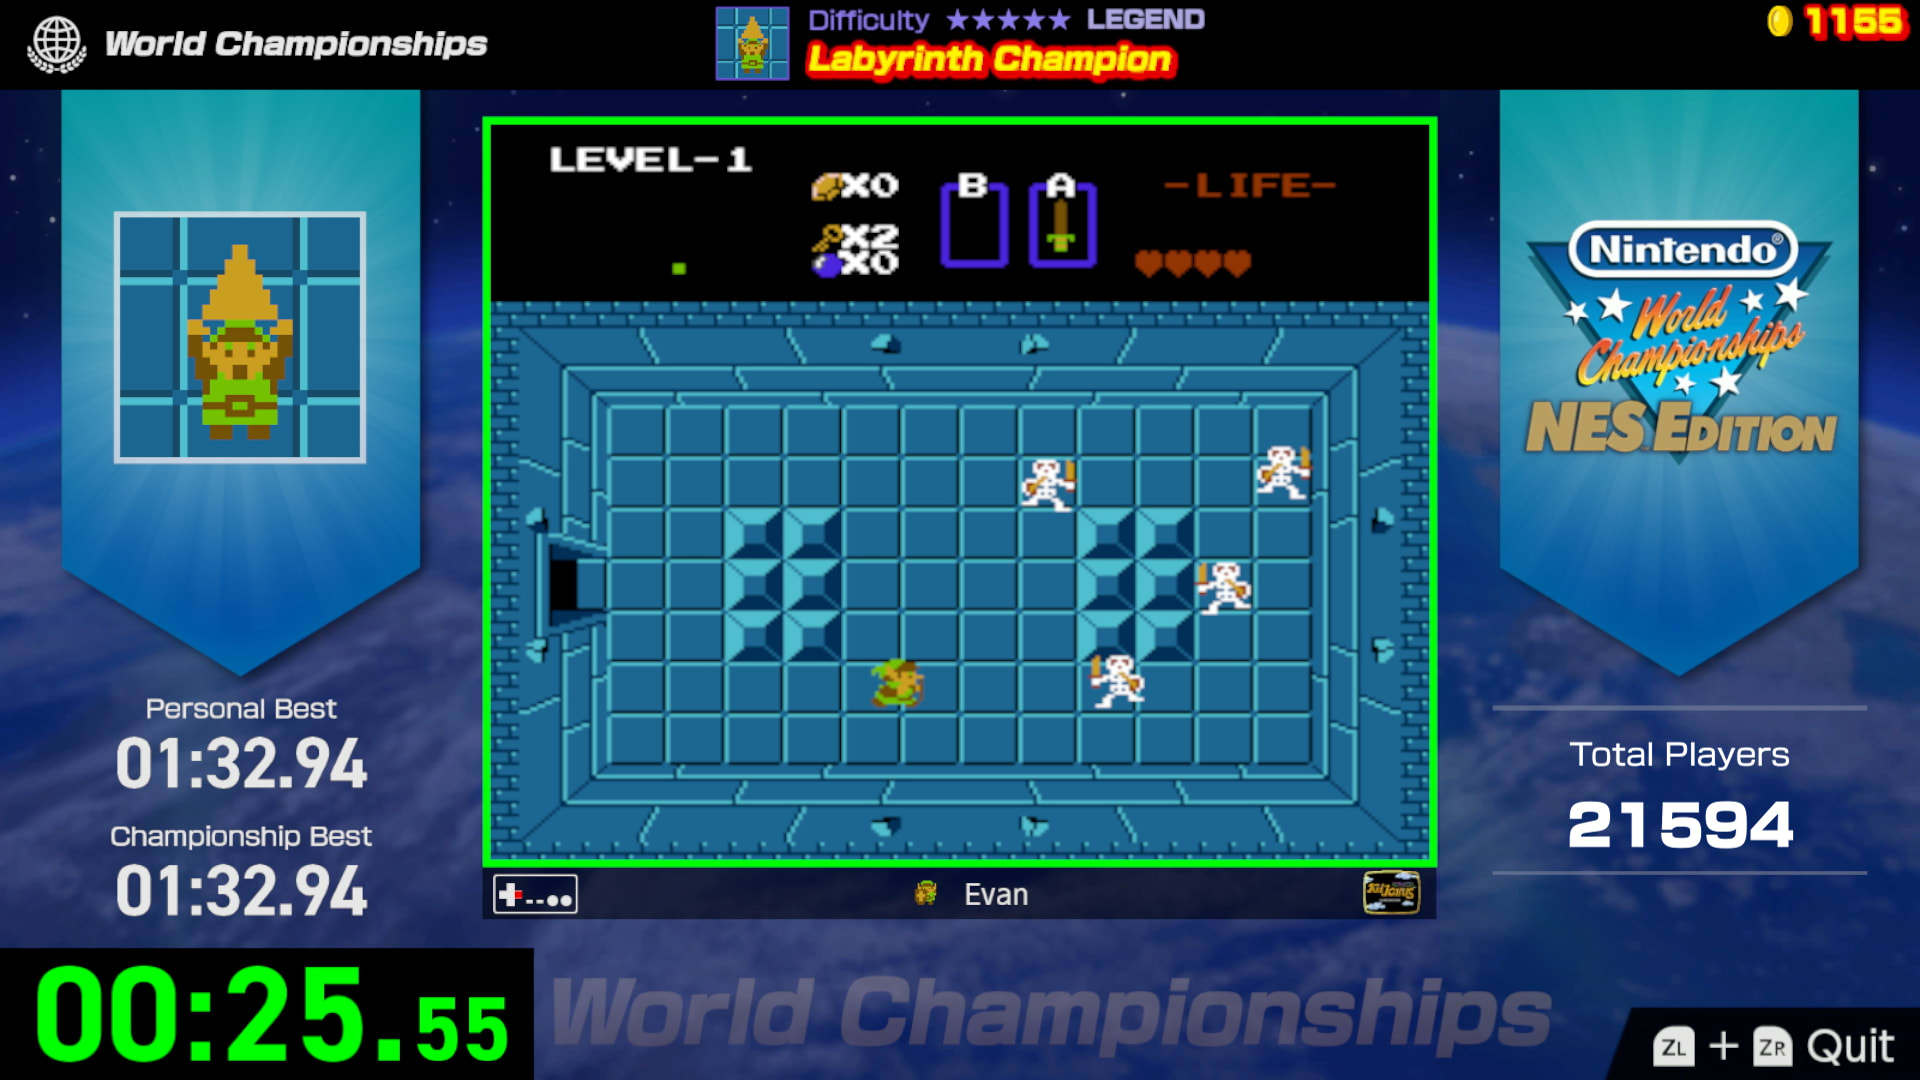 A player competes in an online challenge for the Legend of Zelda. The player’s current time, their personal best time, the championship best time, and total player count are displayed on the sides.